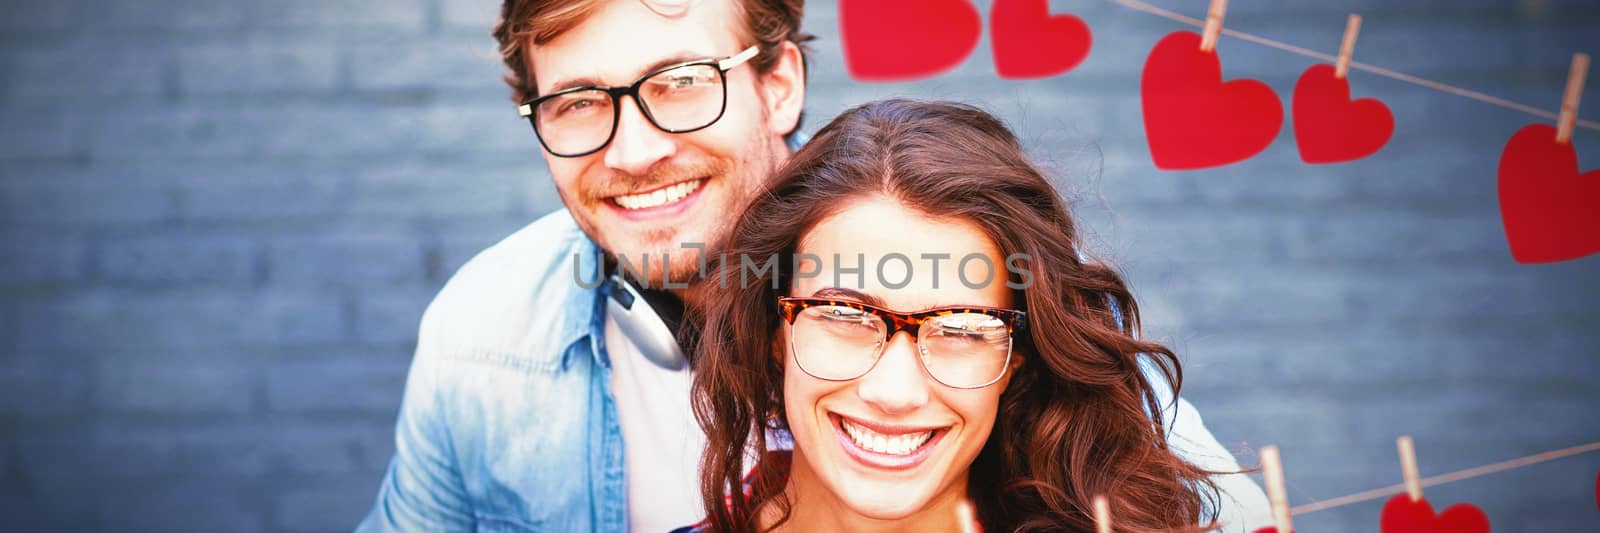 Hearts hanging on a line against portrait of happy young couple in spectacles